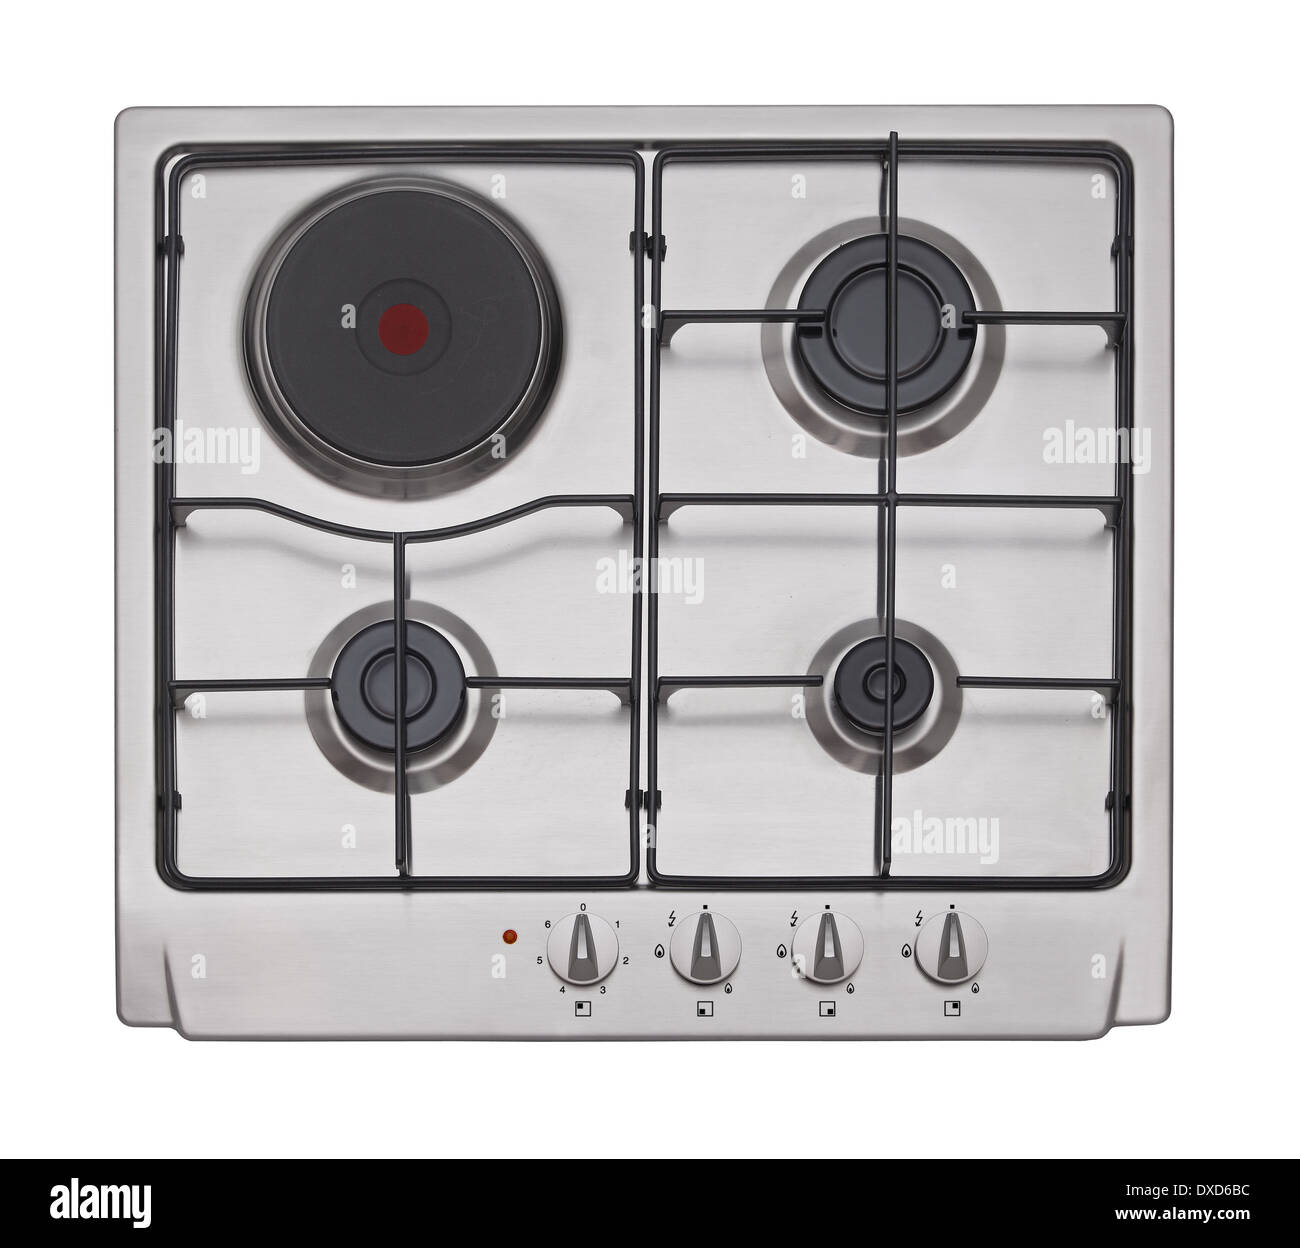 Stainless steel gas and electric hob Stock Photo